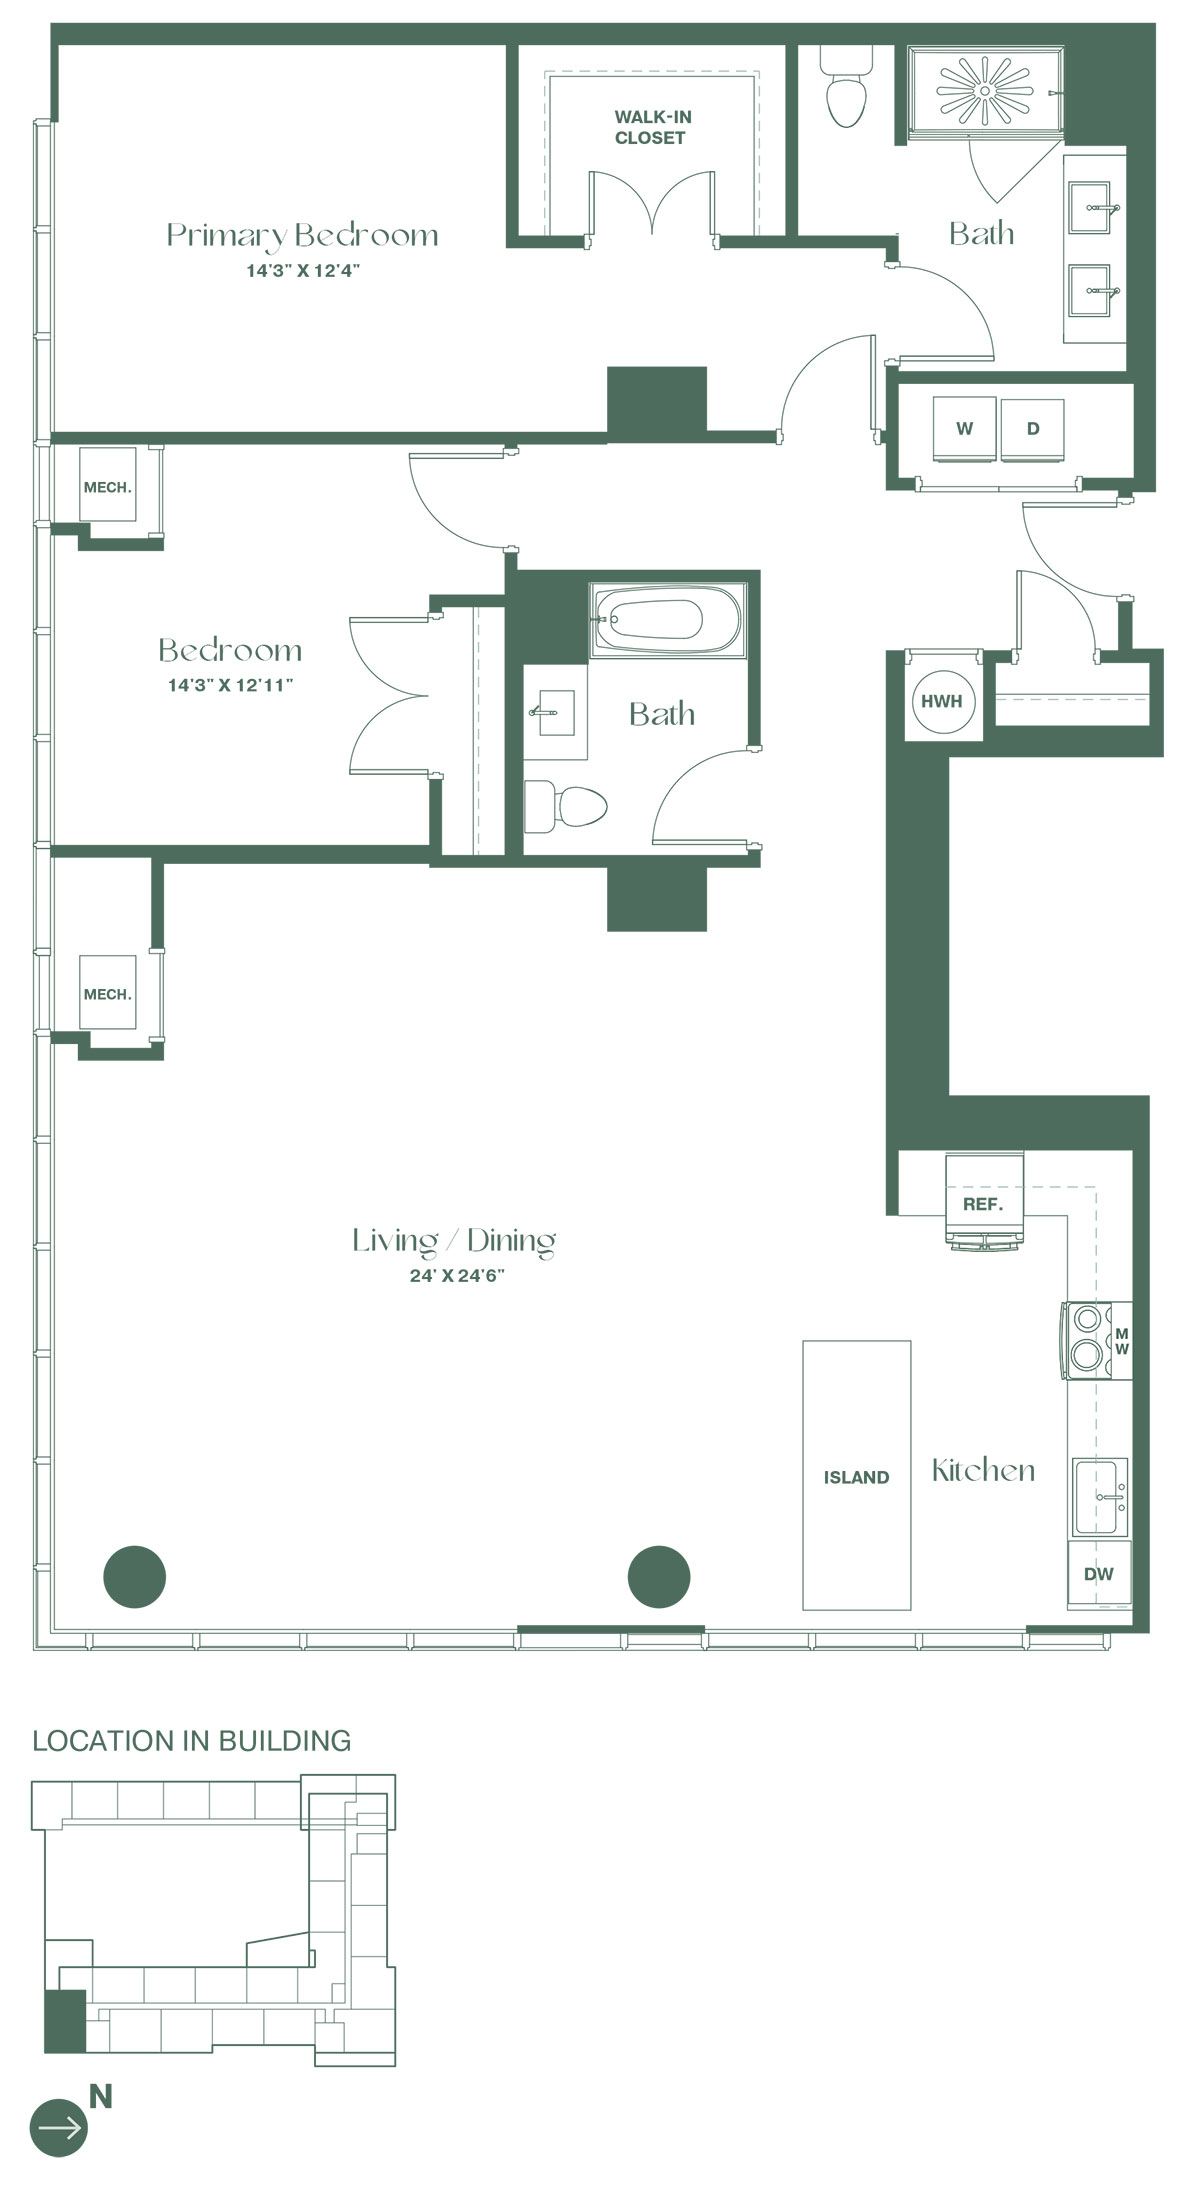 This floorplan for a two bedroom, two bathroom apartment at RVR at Xchange shows an entry hallway leading to a full bathroom, and a bedroom with a closet. To the left is a spacious living and dining area, a fully equipped open kitchen with a dishwasher and a kitchen island. To the right of the entryway is the entrance to the primary bedroom, containing a large walk-in closet and a full bathroom.